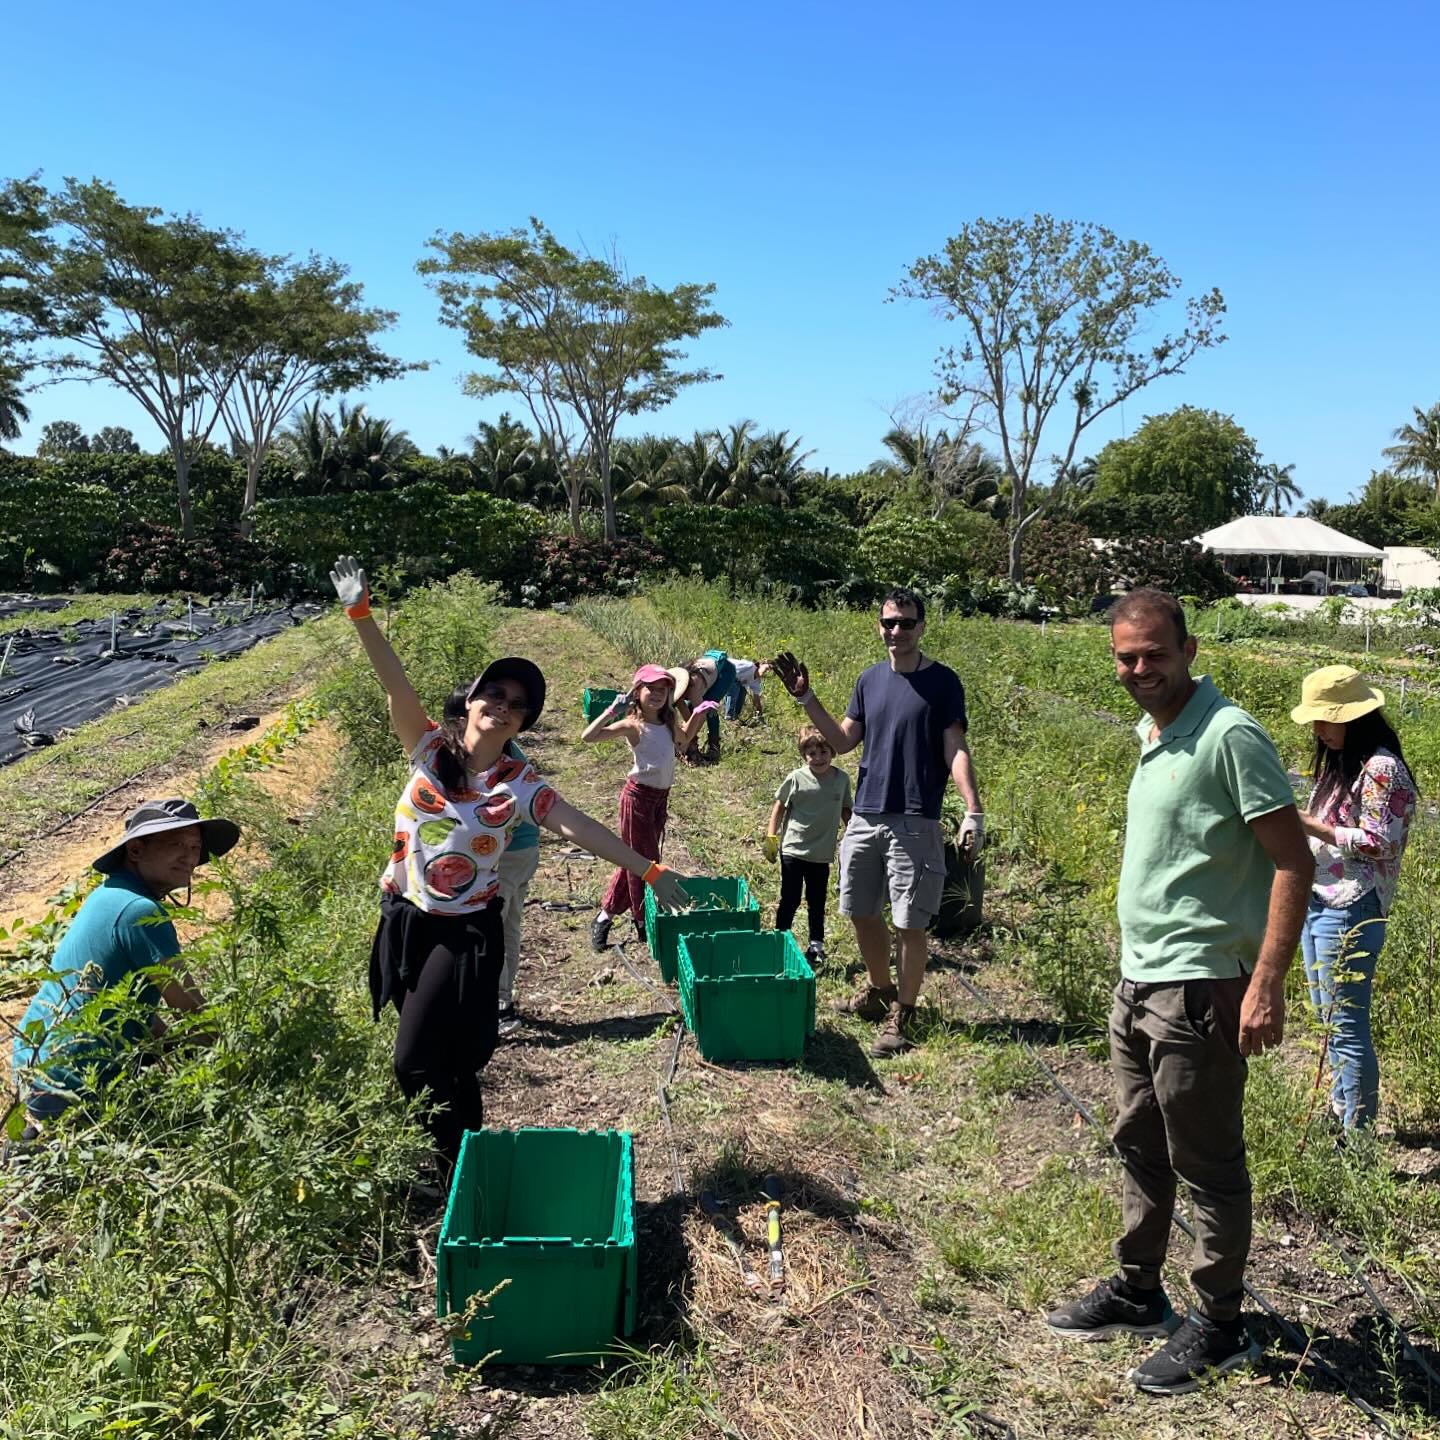 The month of April turned out to host one fantastic Family (and friends) Volunteer day. Thank you for an amazing, fun and fulfilling farm day!

Accomplished:

- Tomatoes harvested 40+lbs
- Cucumbers harvested 30lbs
- Onions harvested... 🧅 ...still n